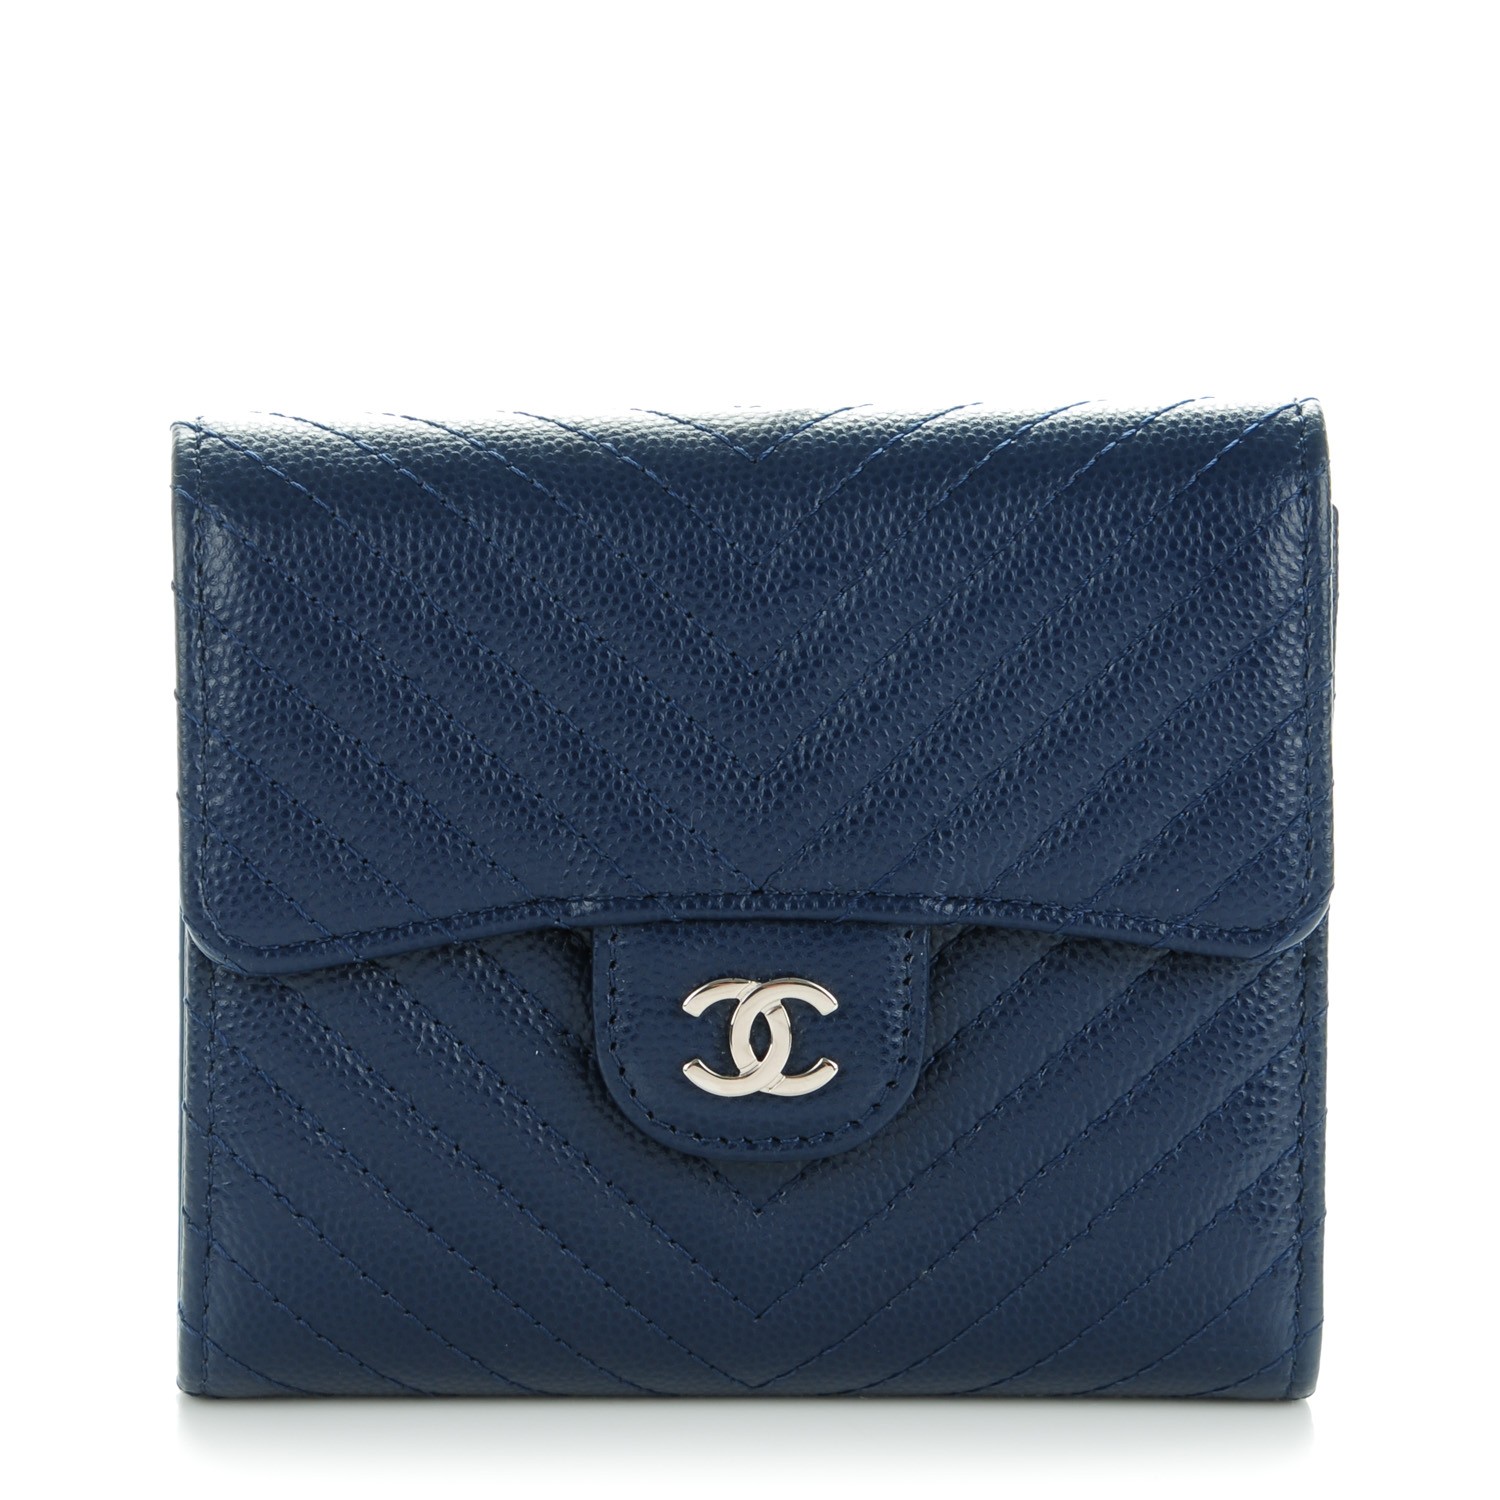 CHANEL Caviar Chevron Quilted Compact Flap Wallet Navy 150612